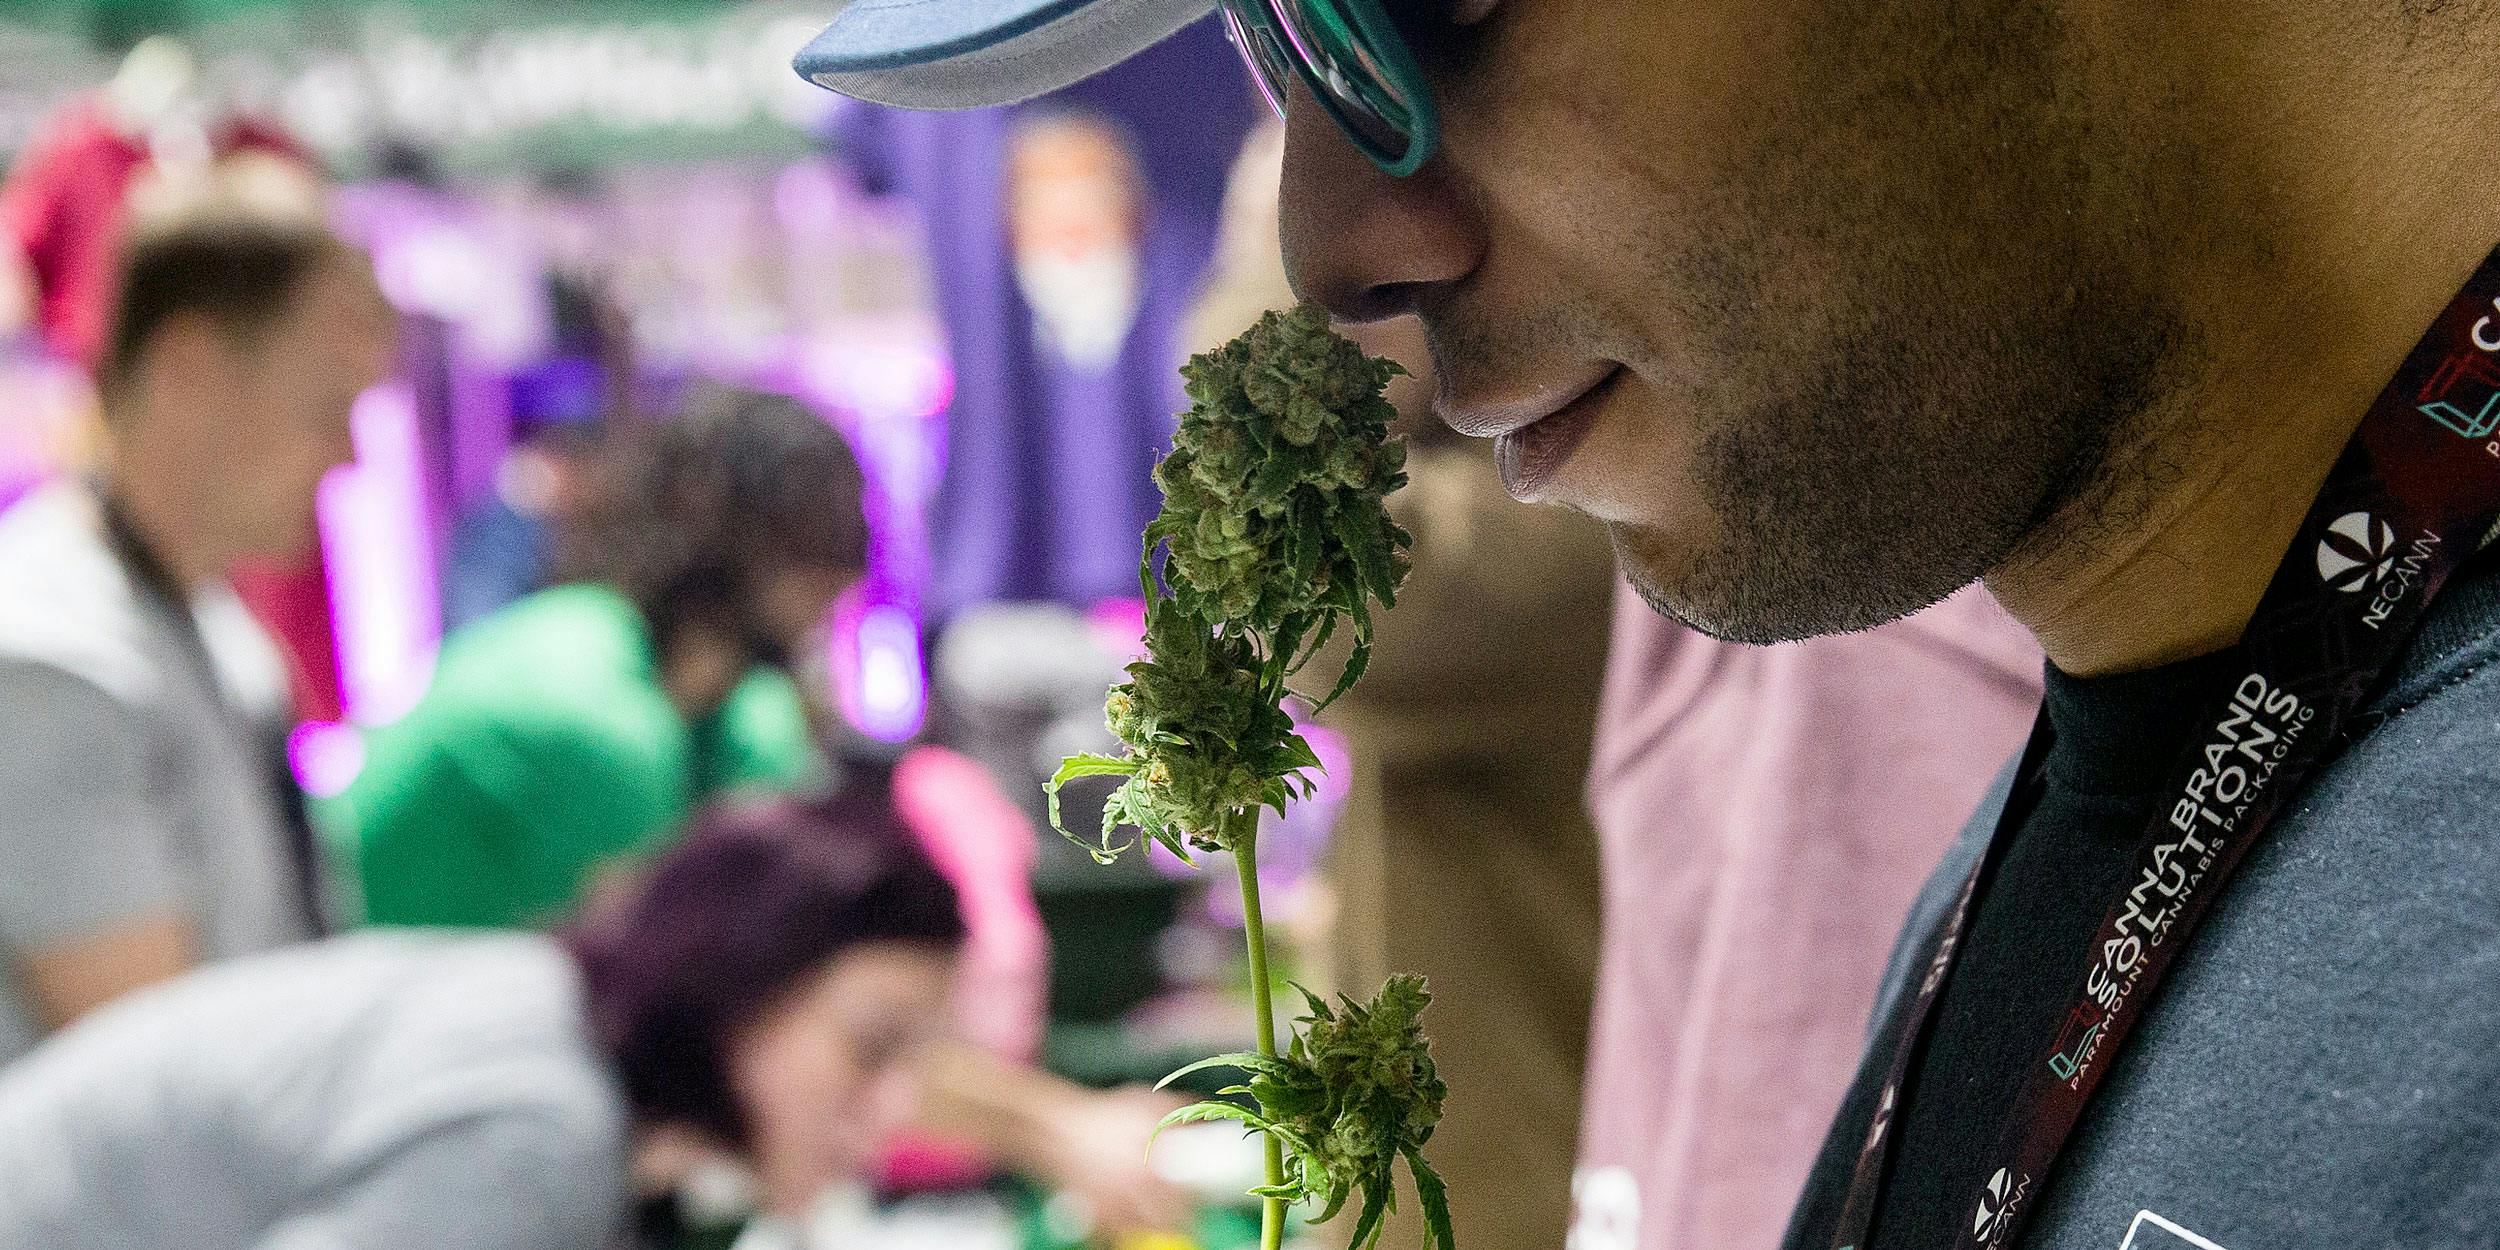 Massachusetts Pot Shops To Open On July 1. But There Won't Be Many Of Them.